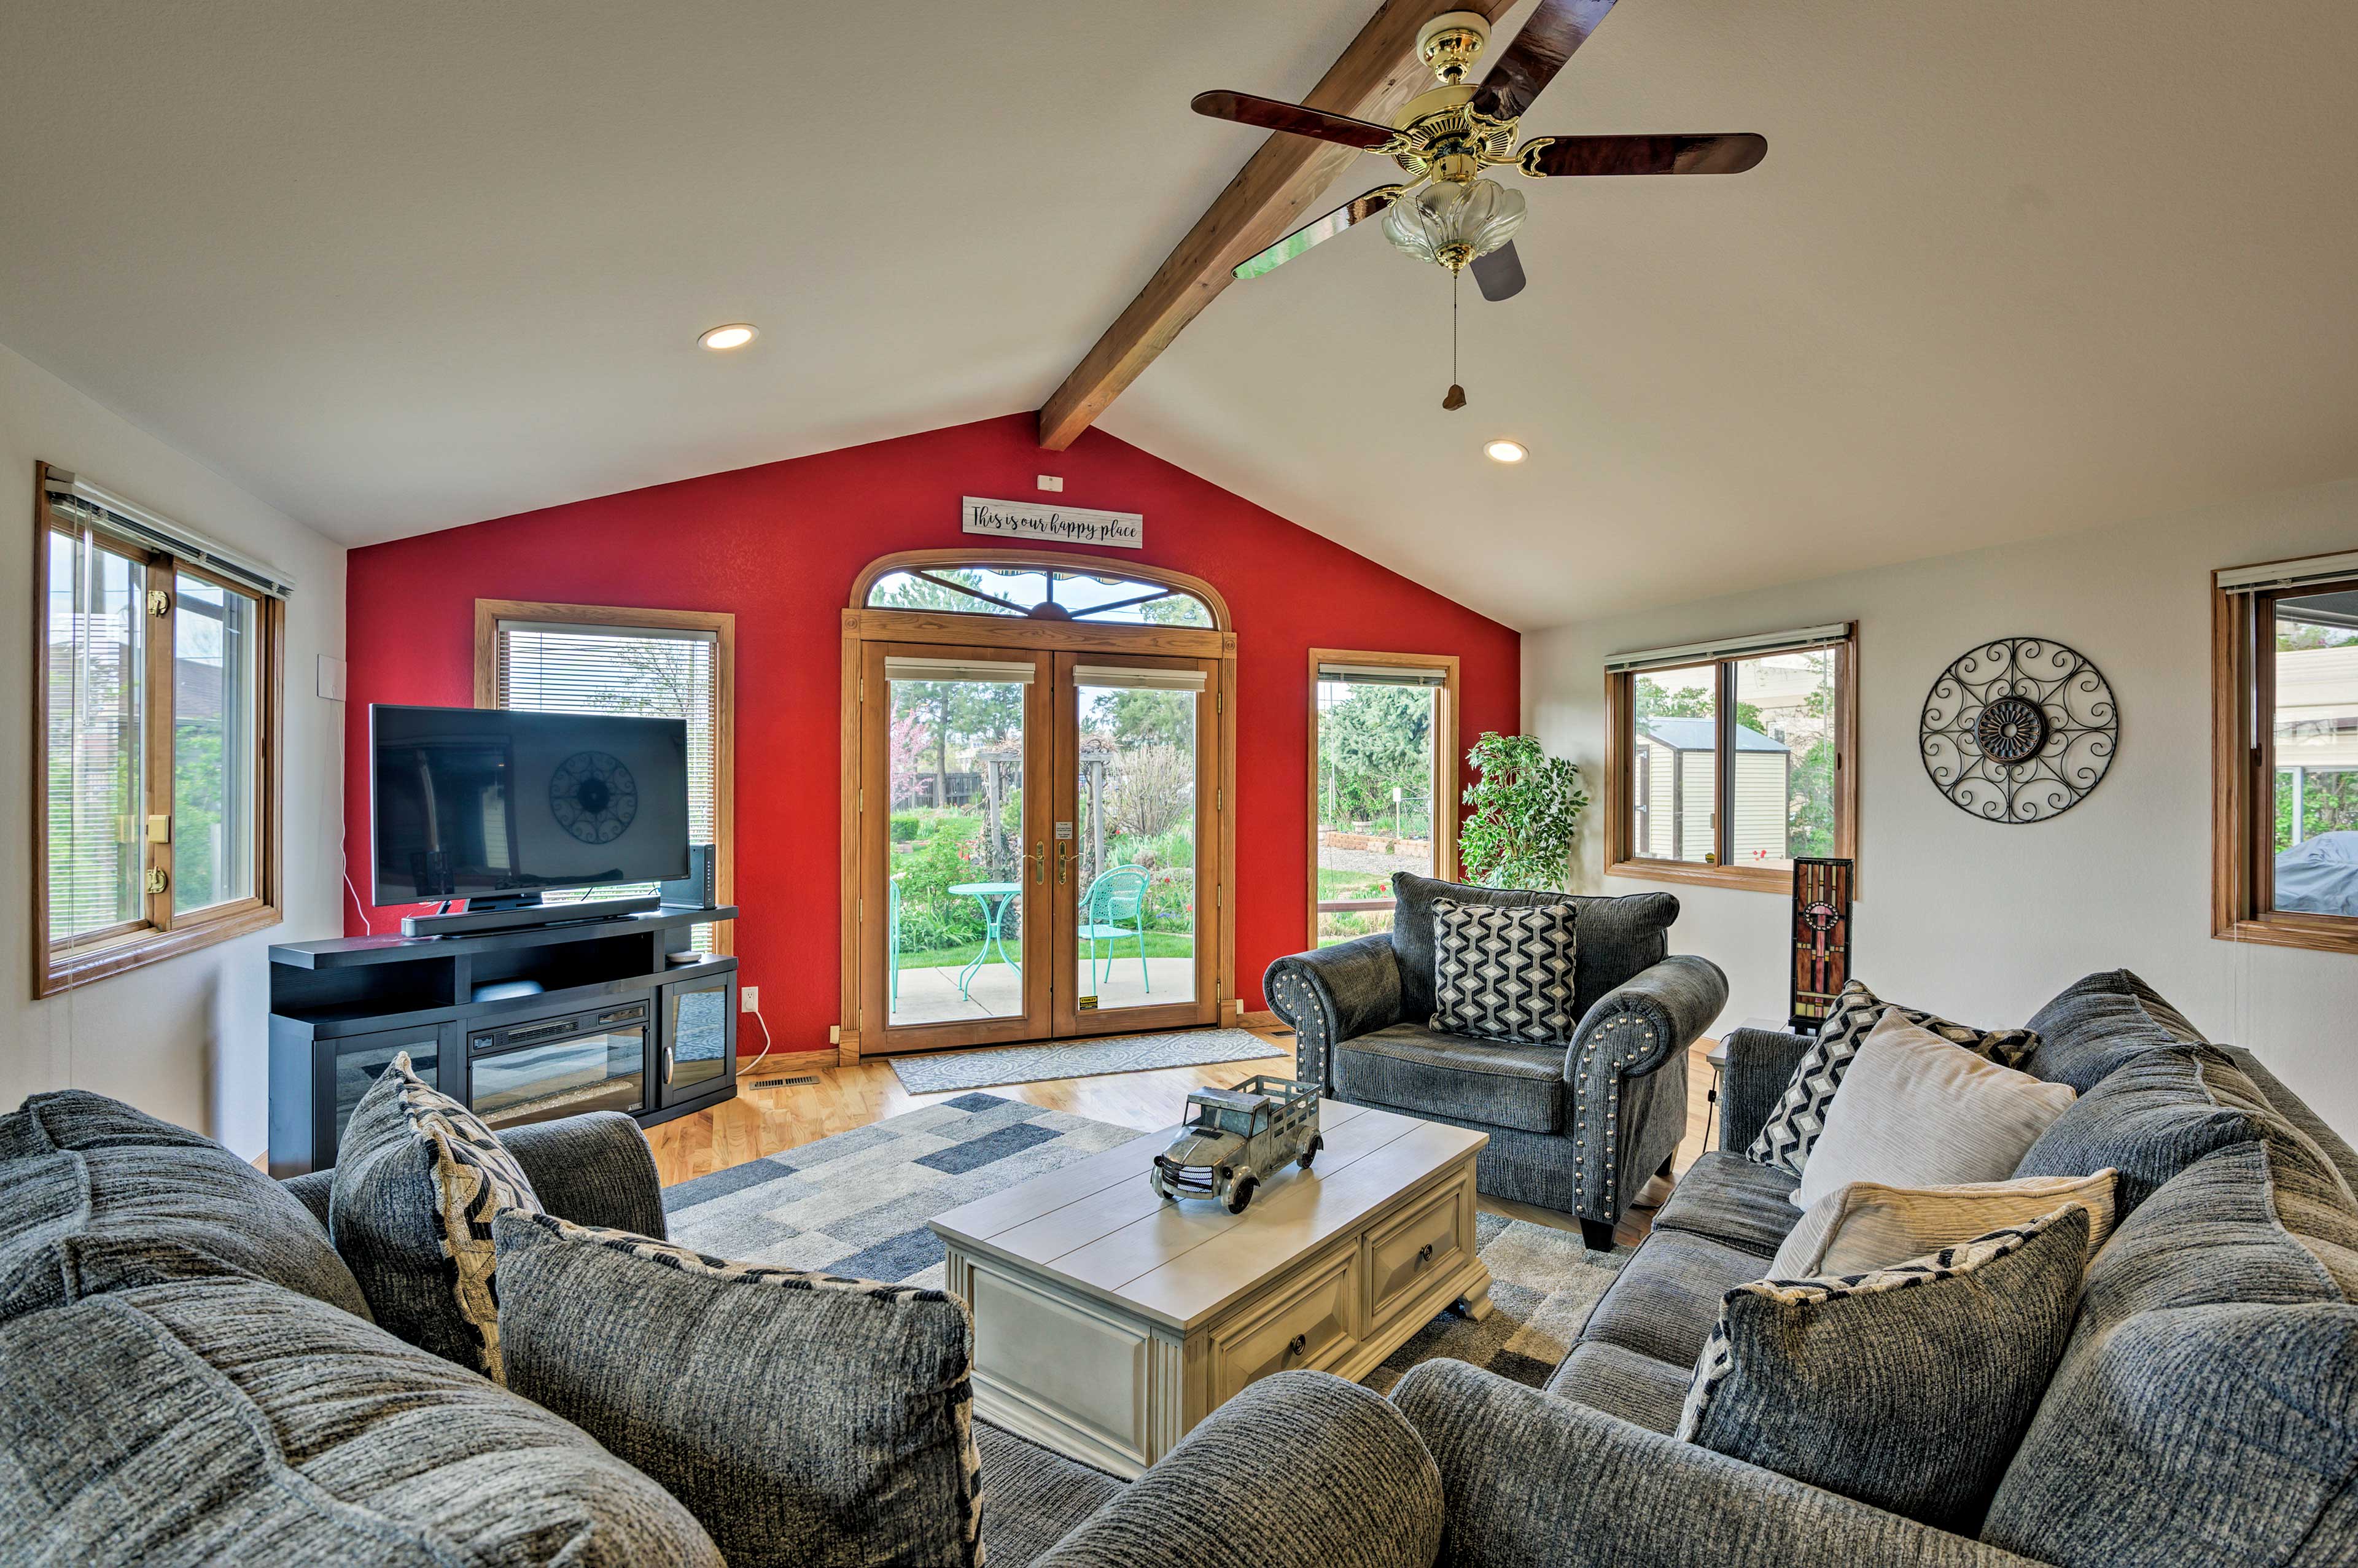 This Arvada vacation rental home invites up to 8 guests on a Colorado getaway!